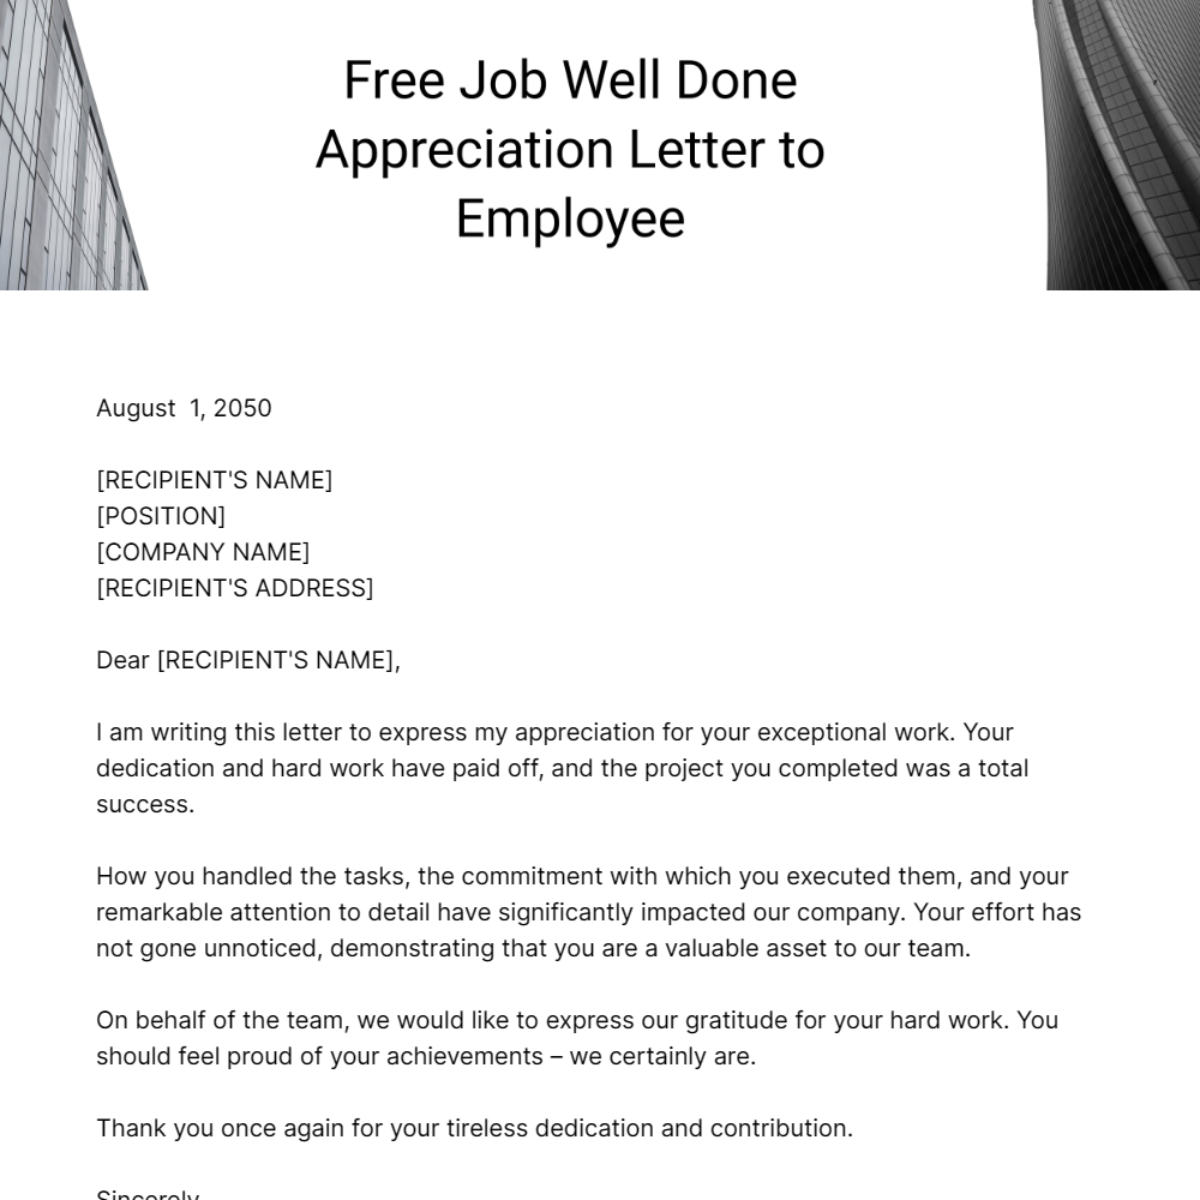 Job Well Done Appreciation Letter to Employee Template